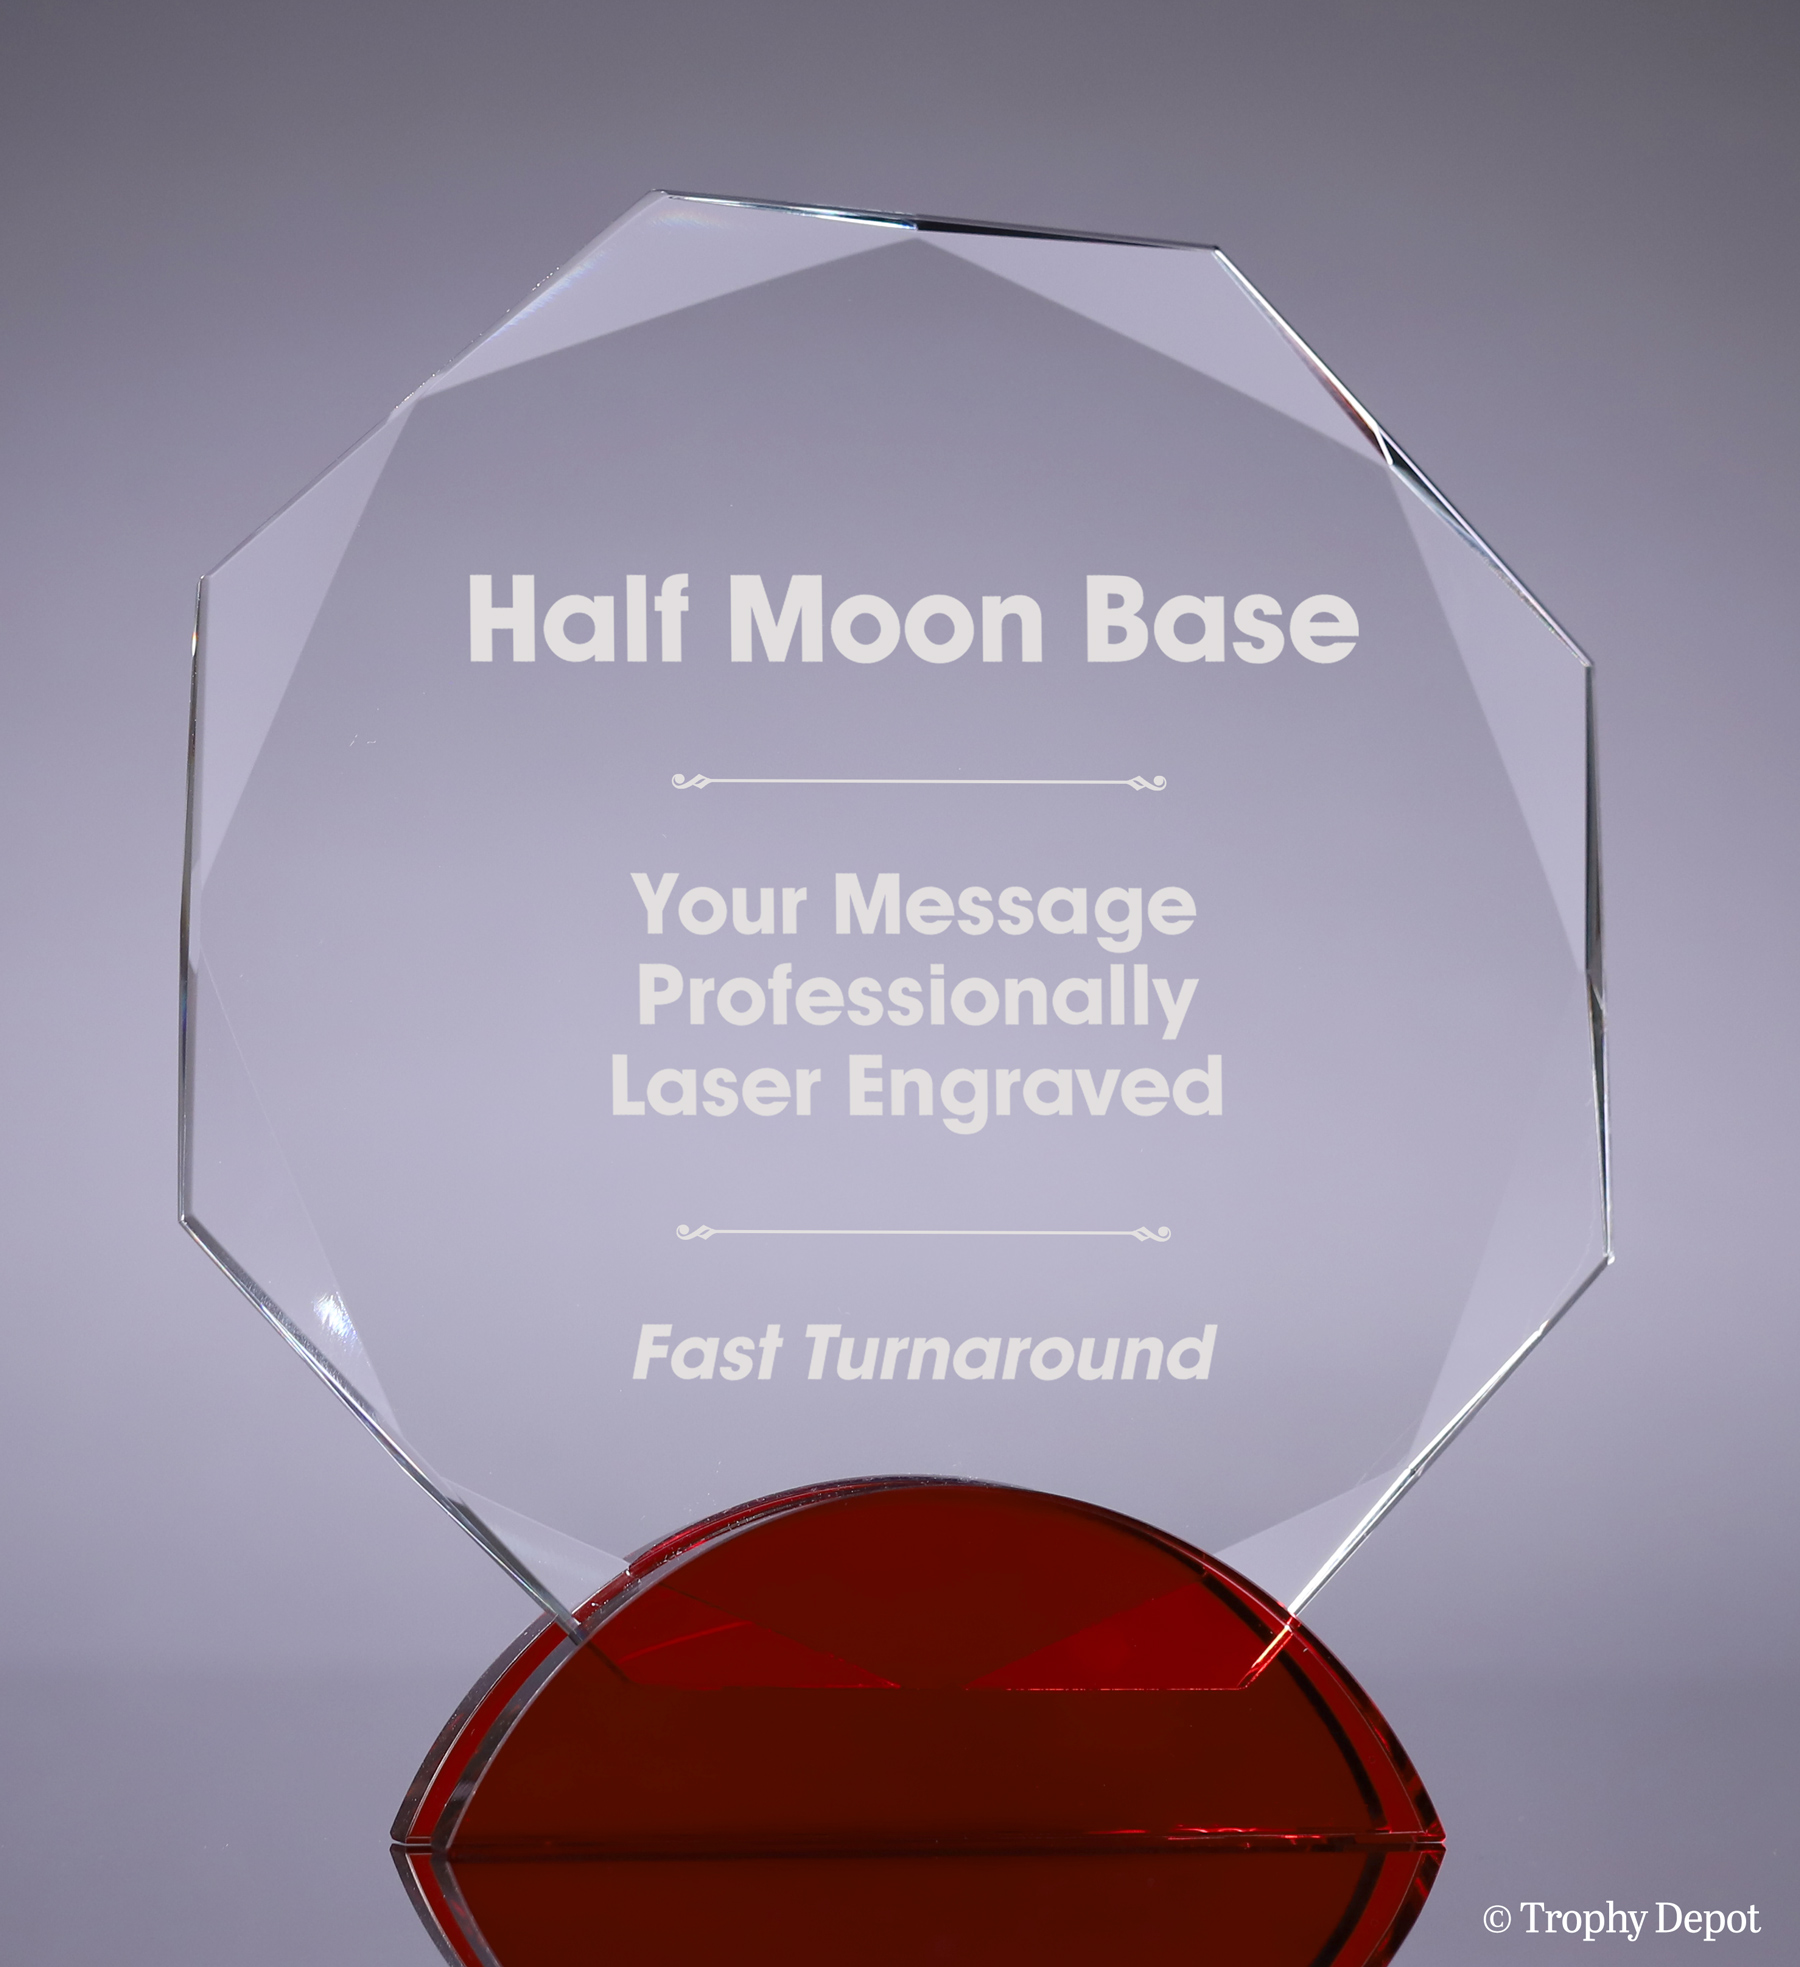 Crystal Octagon Award on Red Double Arc Base - 6.5 inch